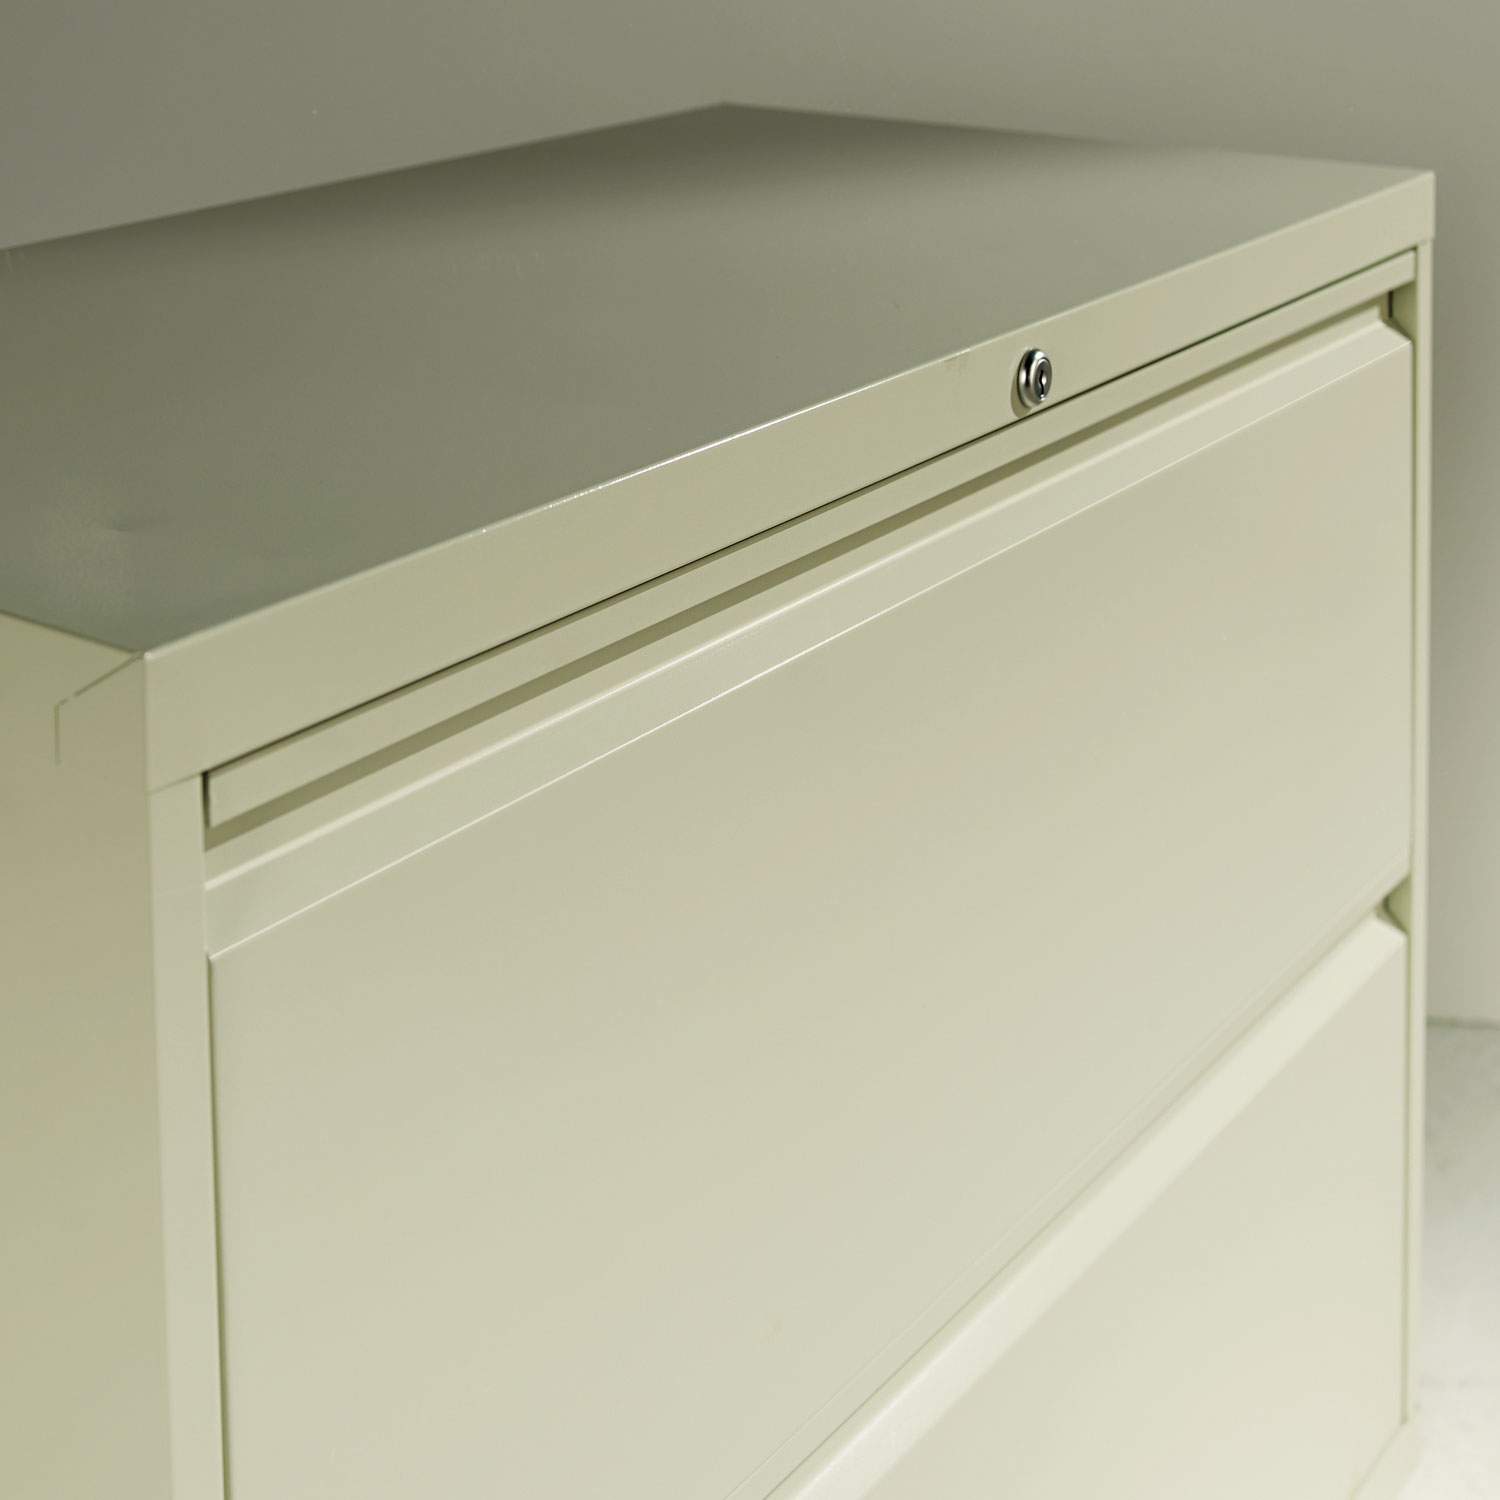 Alera Four-drawer Lateral File Cabinet, 30w X 18d X 52.5h, Light Gray - image 2 of 3